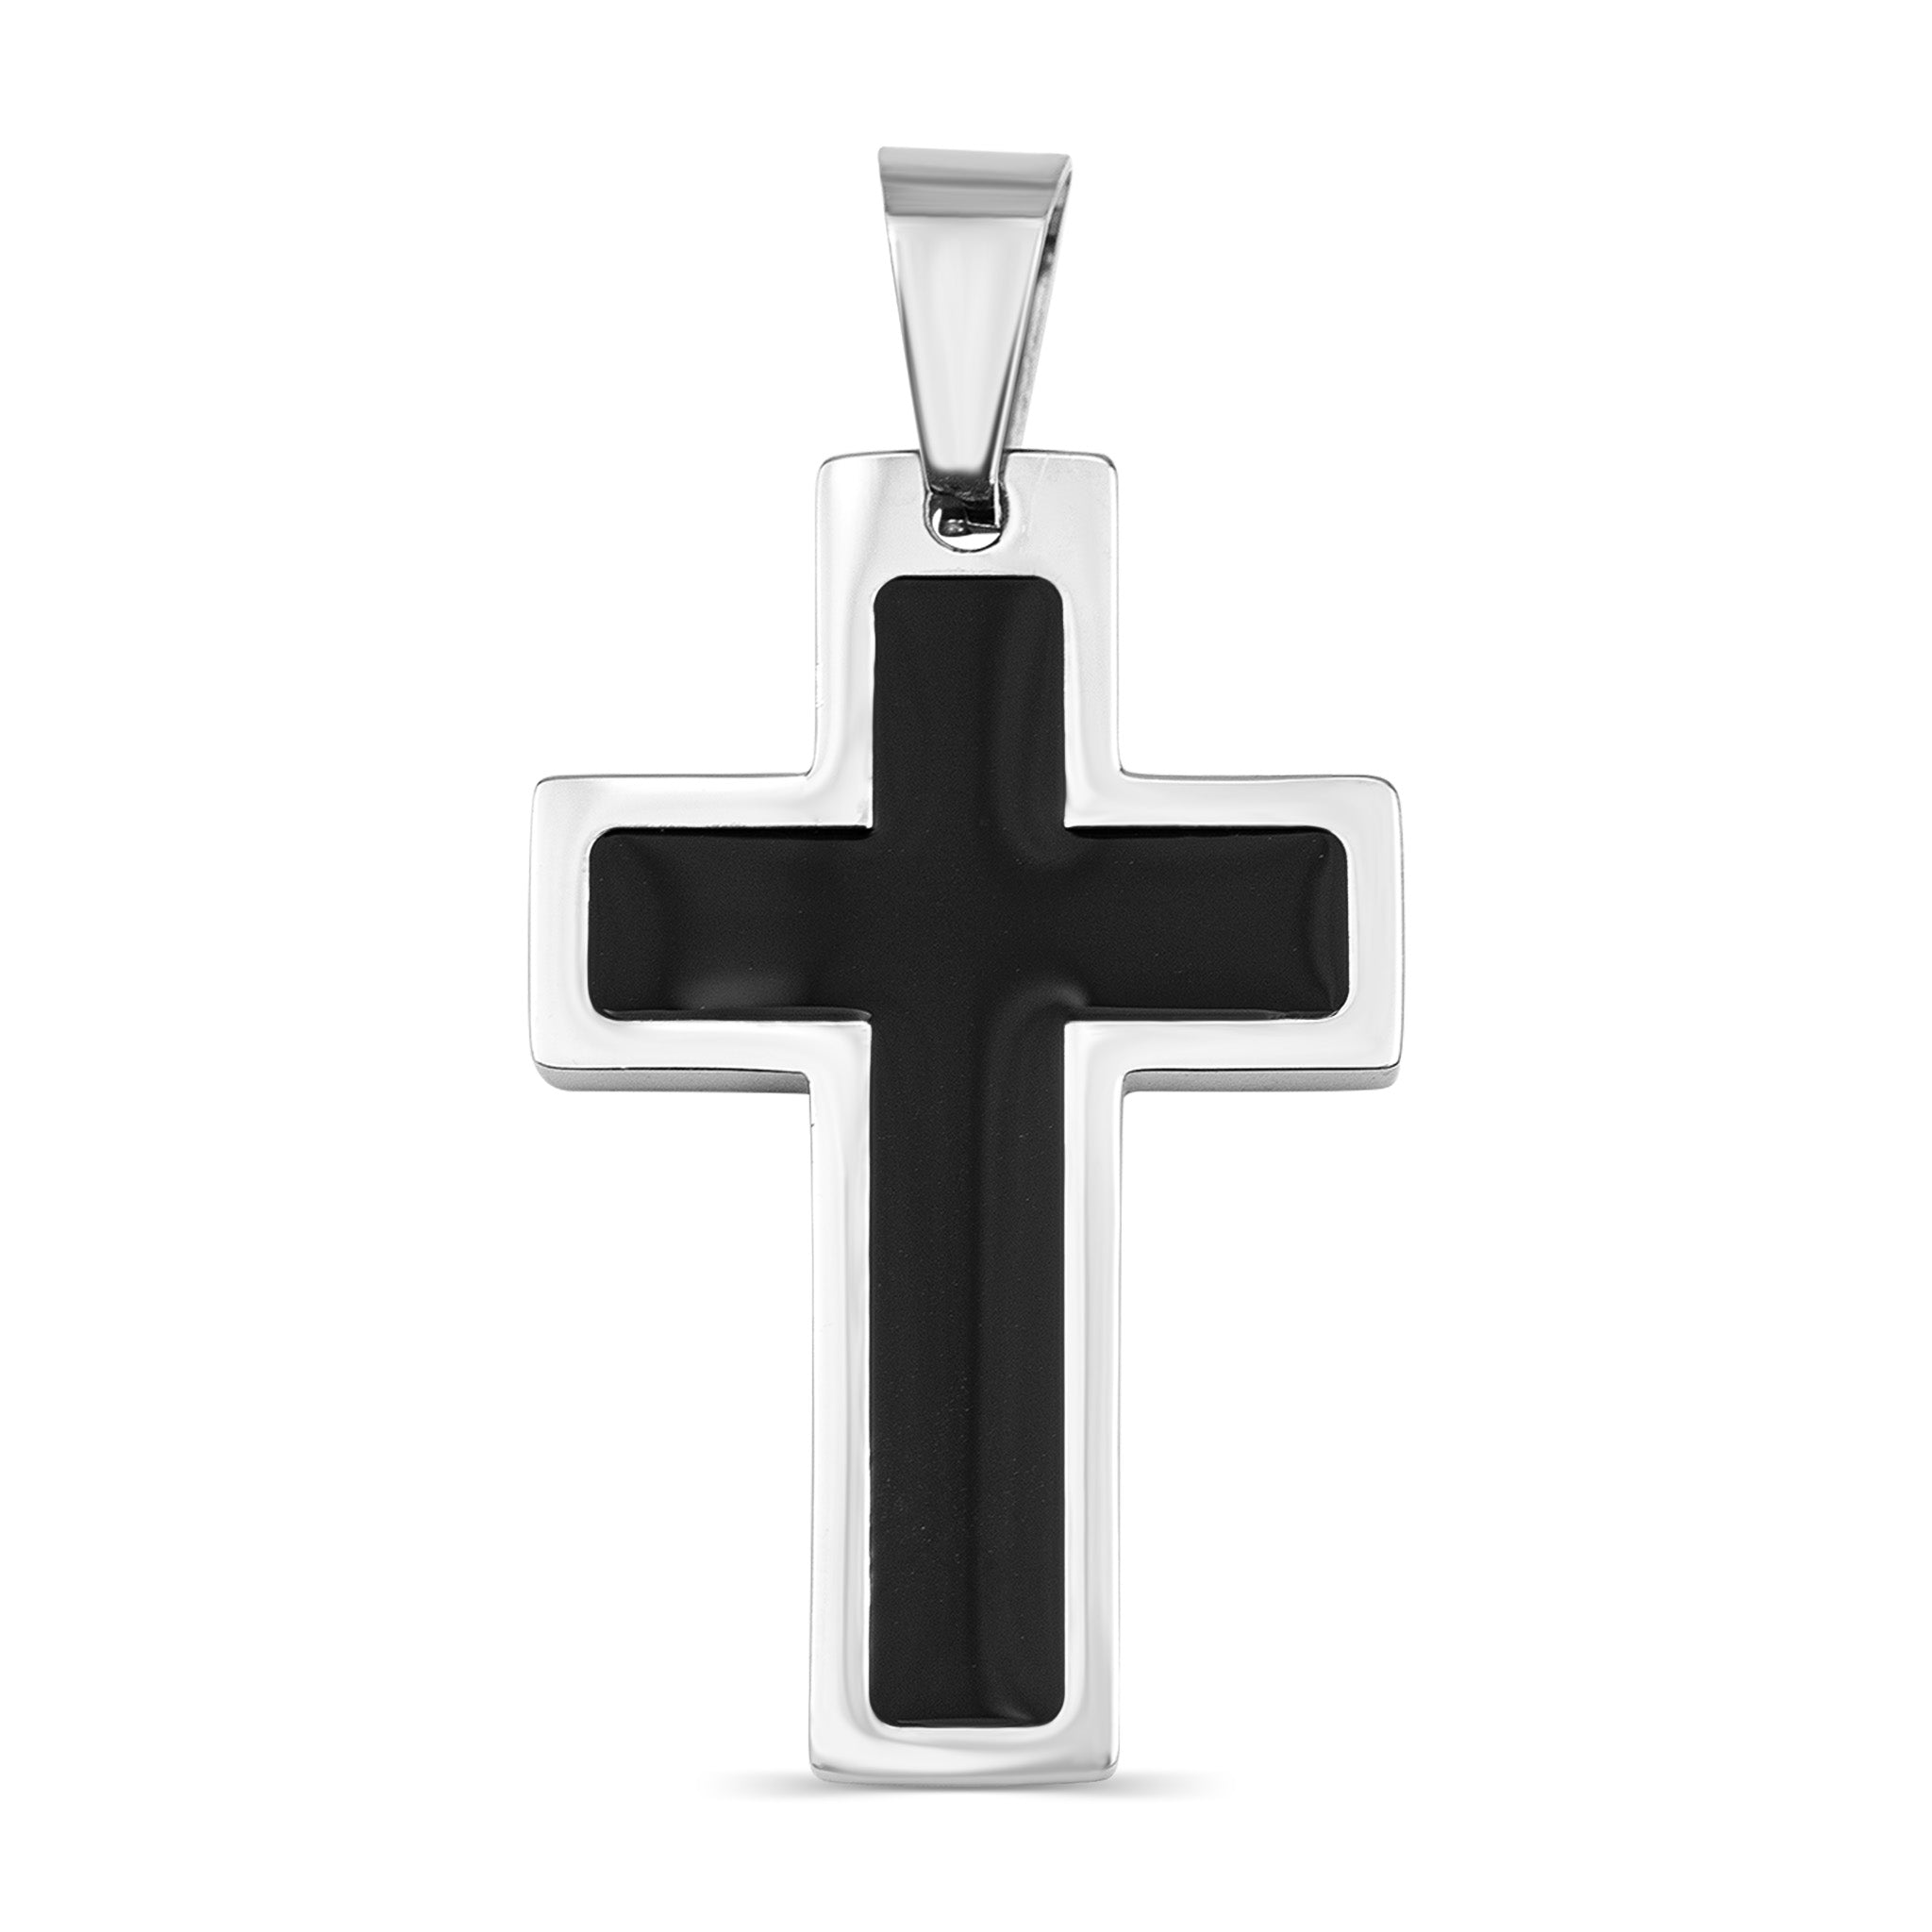 Stainless steel cross charms, Tarnish free, Hypoallergenic supplies